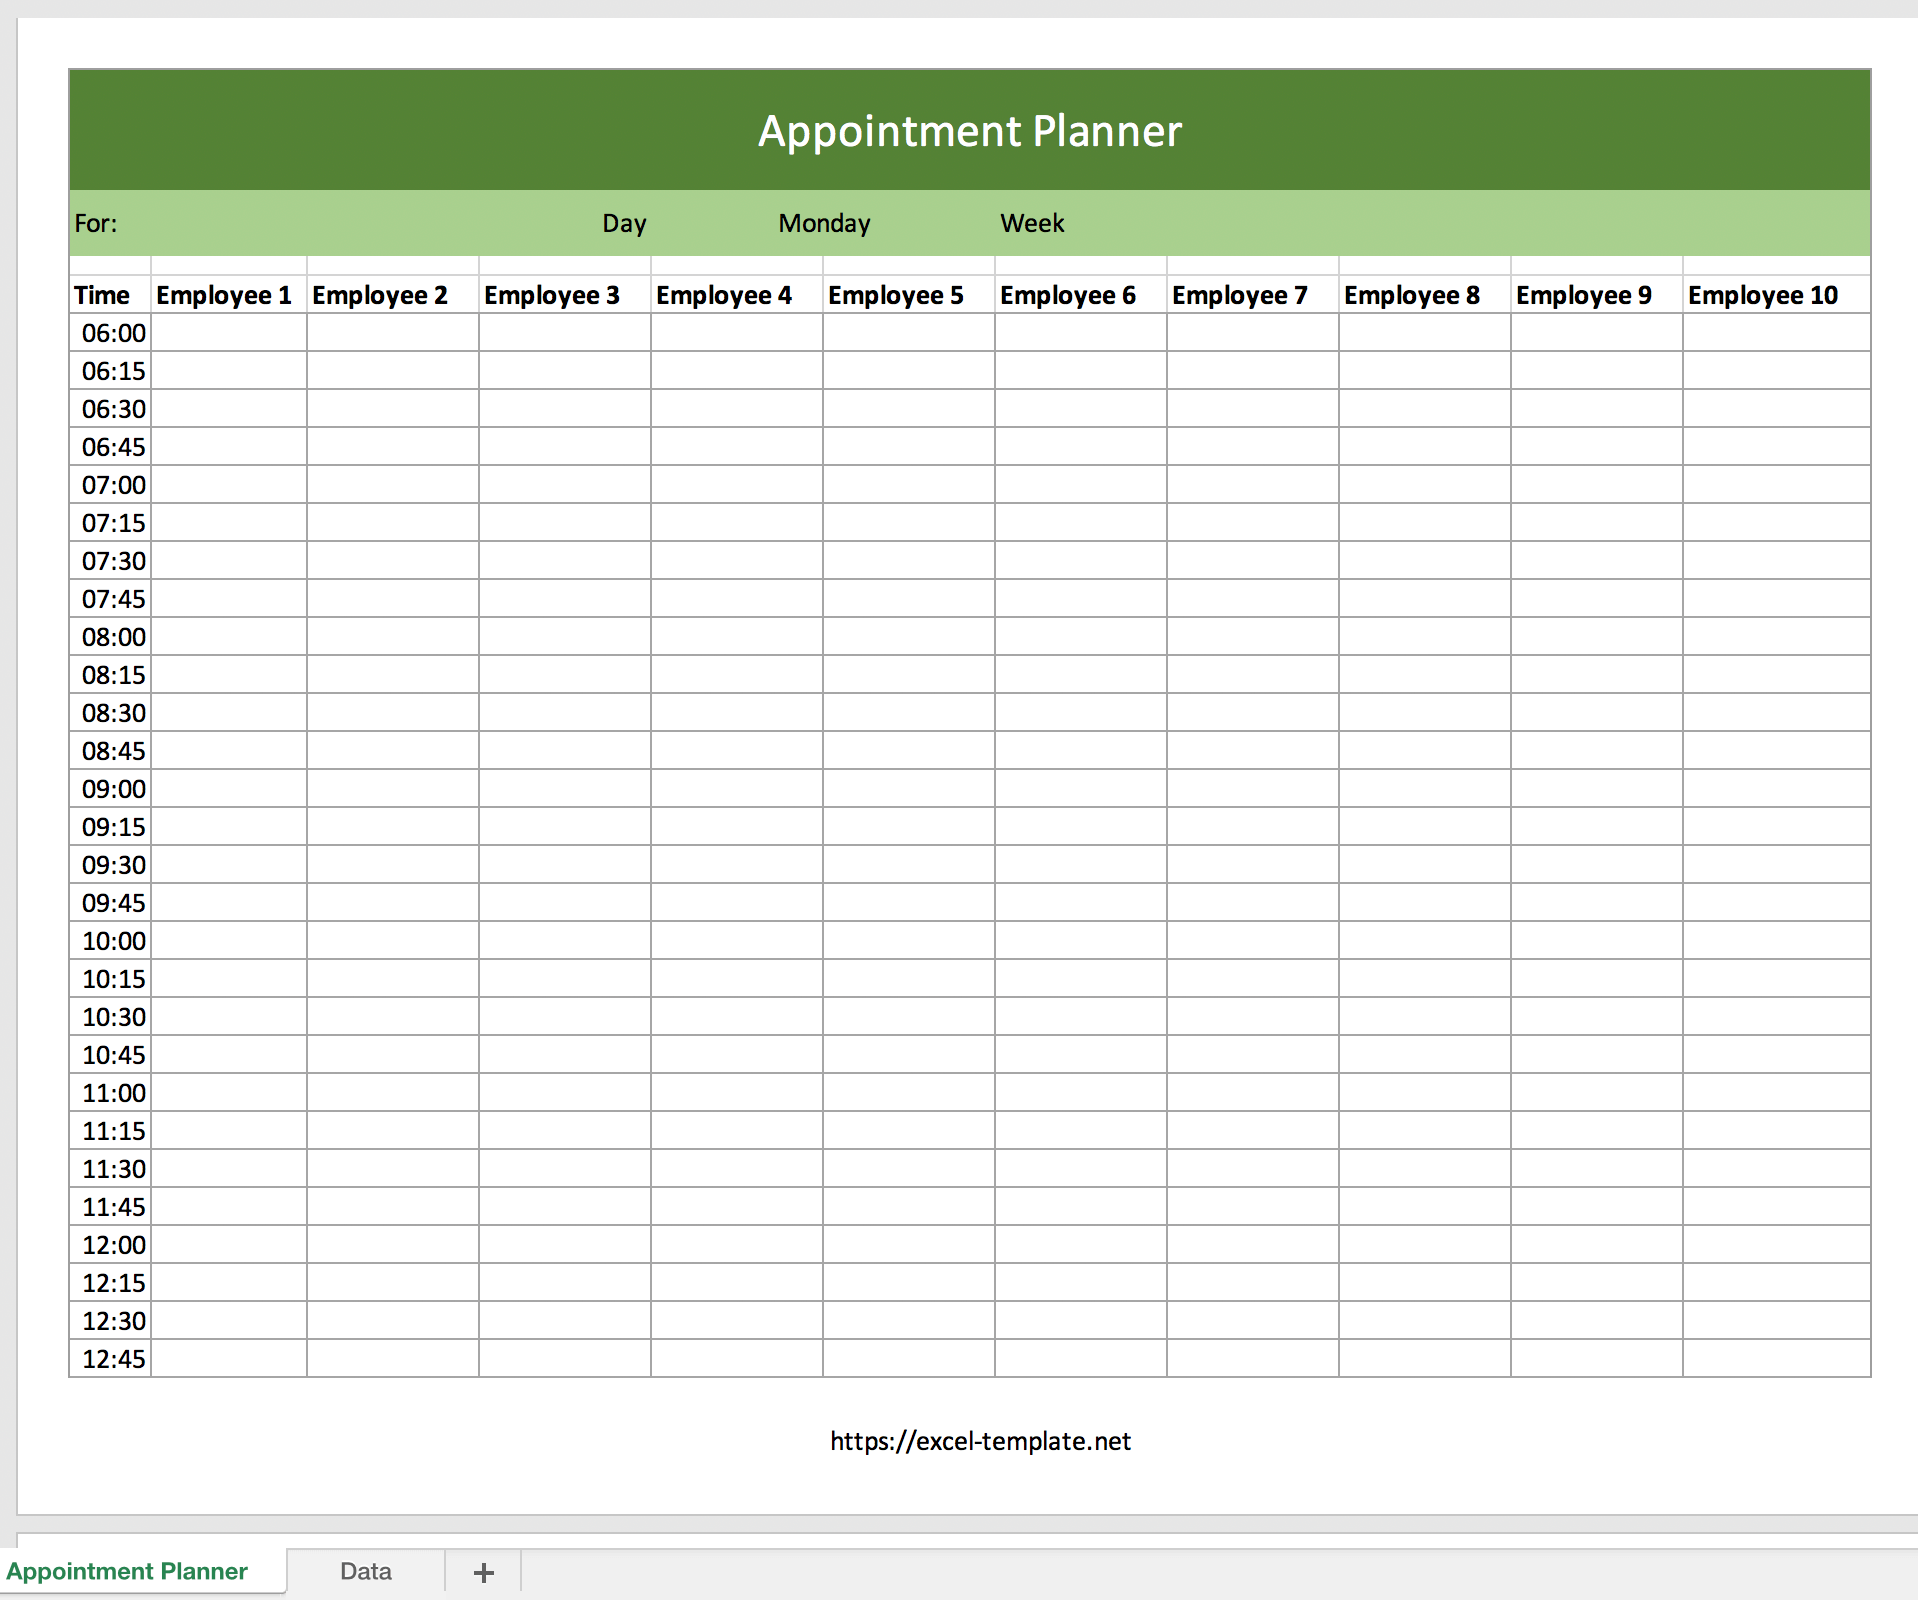 Excel AppointmentPlanner for free